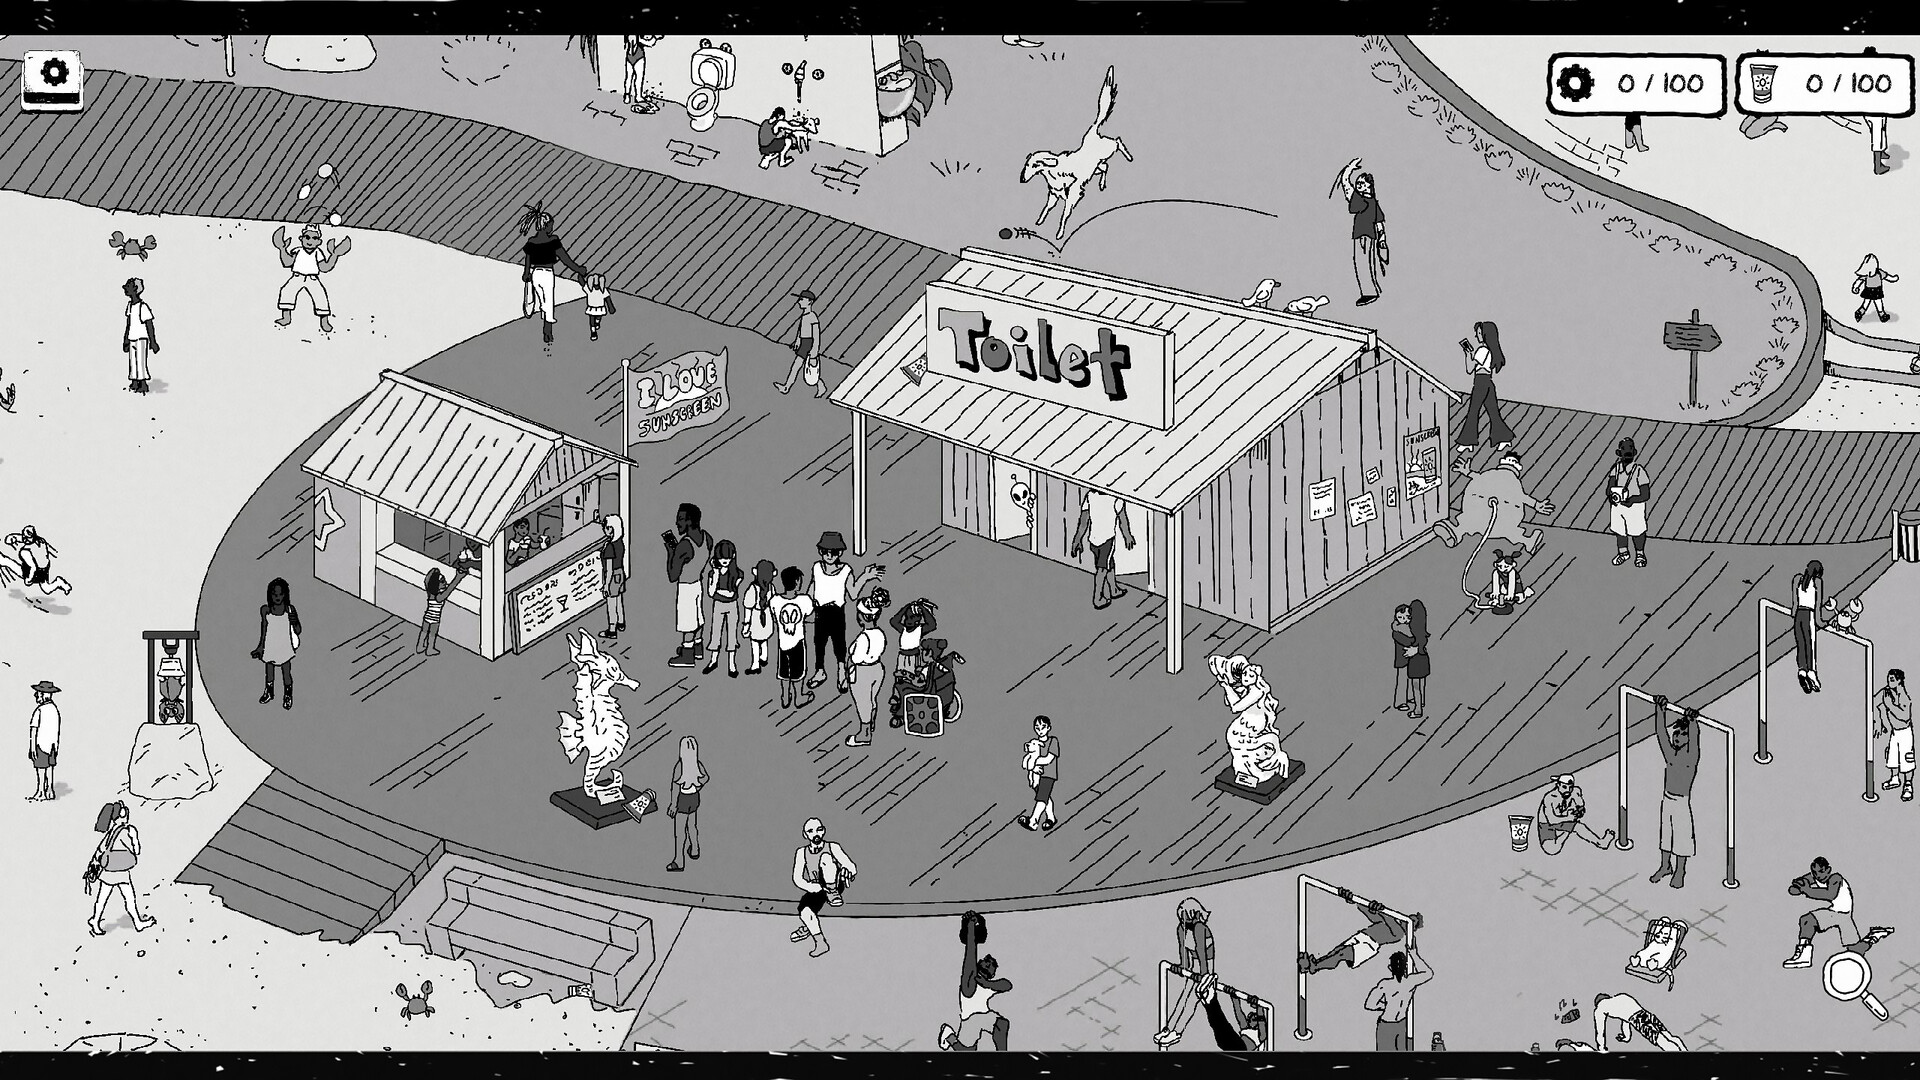 Scene of Beach with people, animals, pull up stands, refreshment stores and toilets. Image is from 100 Hidden Kooky.